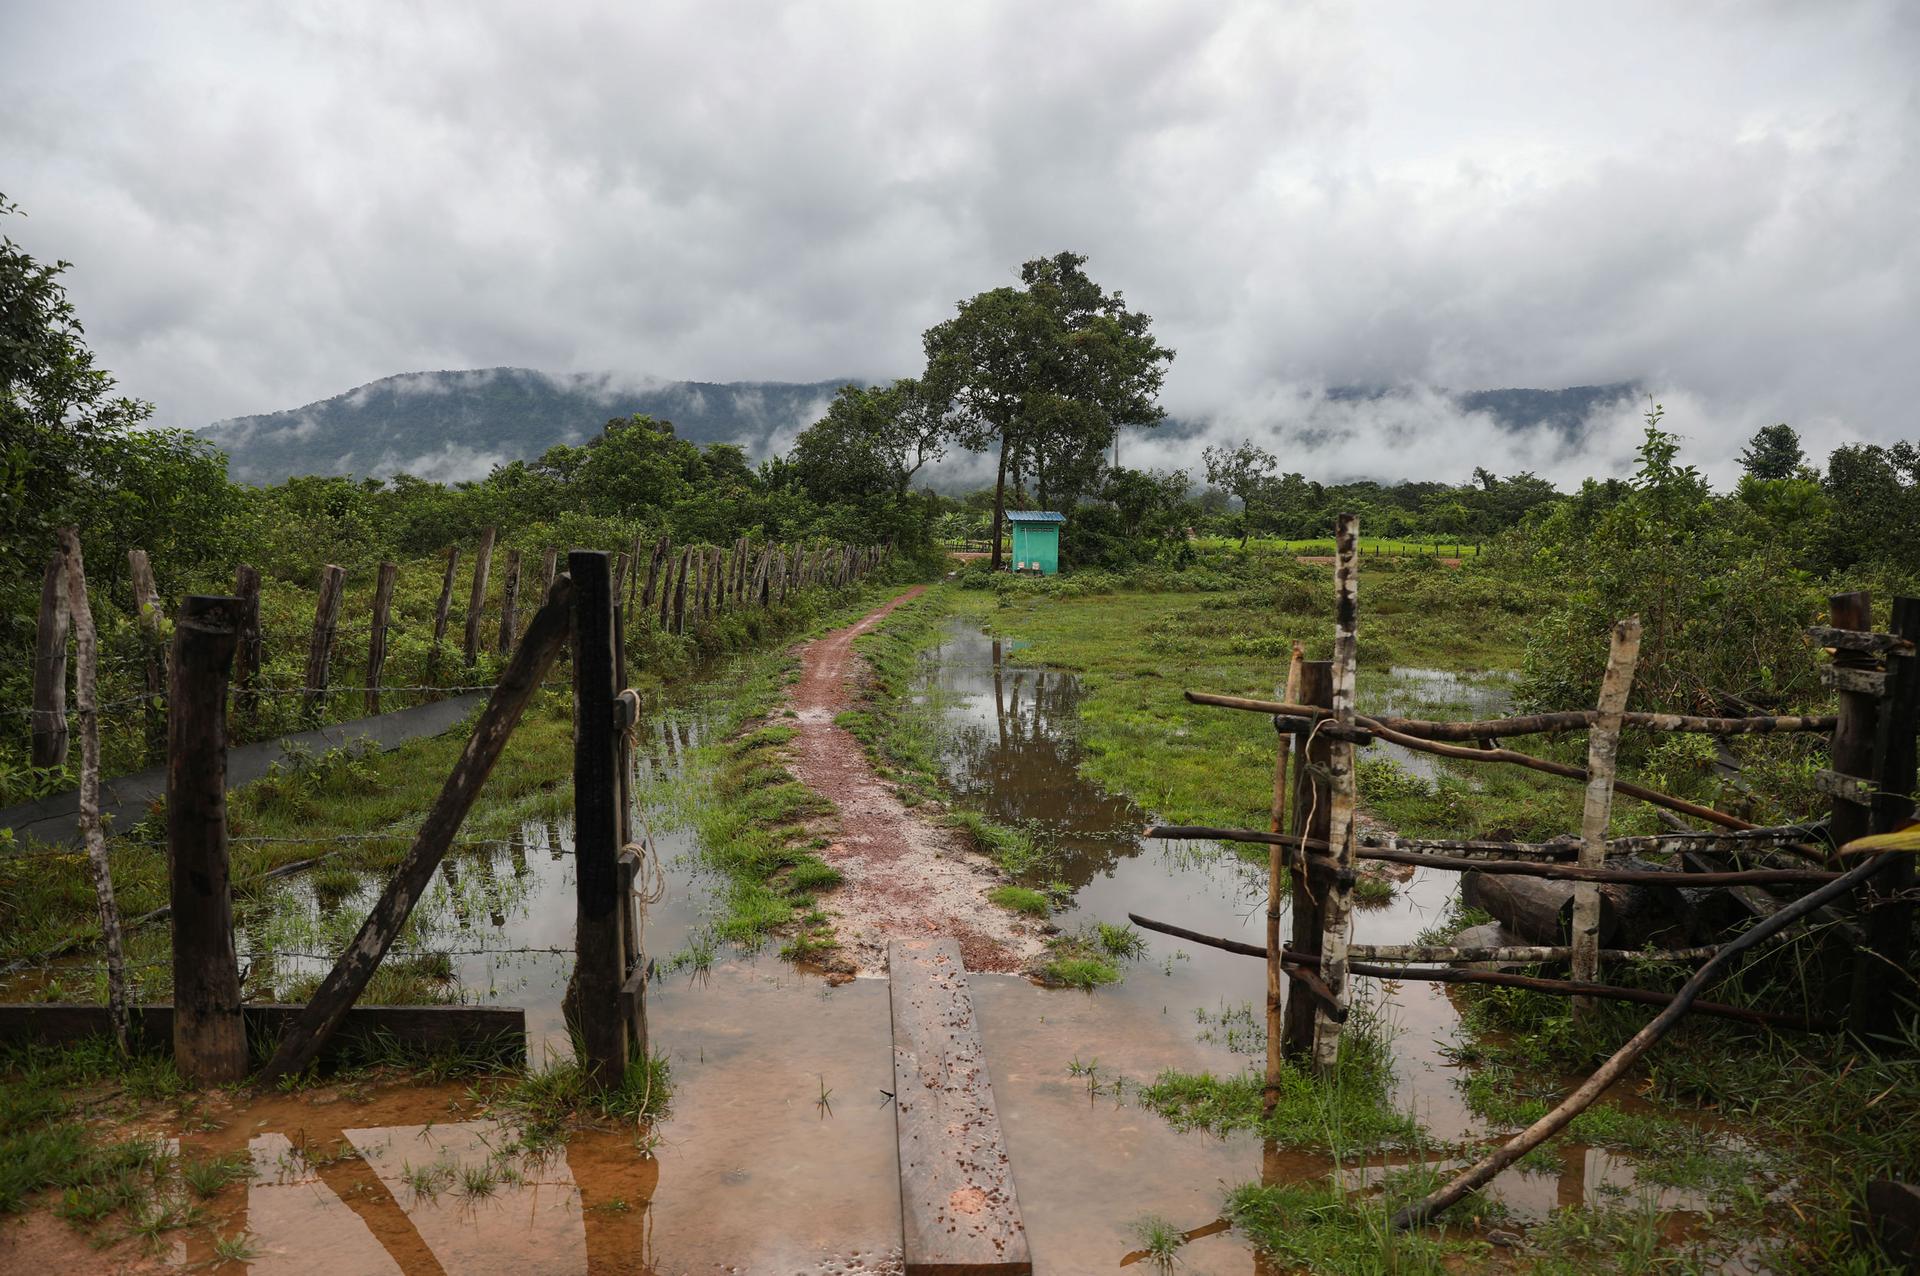 A bathroom, supported by the Southern Cardamom REDD+ Project within the national park, is visible from the rain-drenched gate of a home in Samraong village.